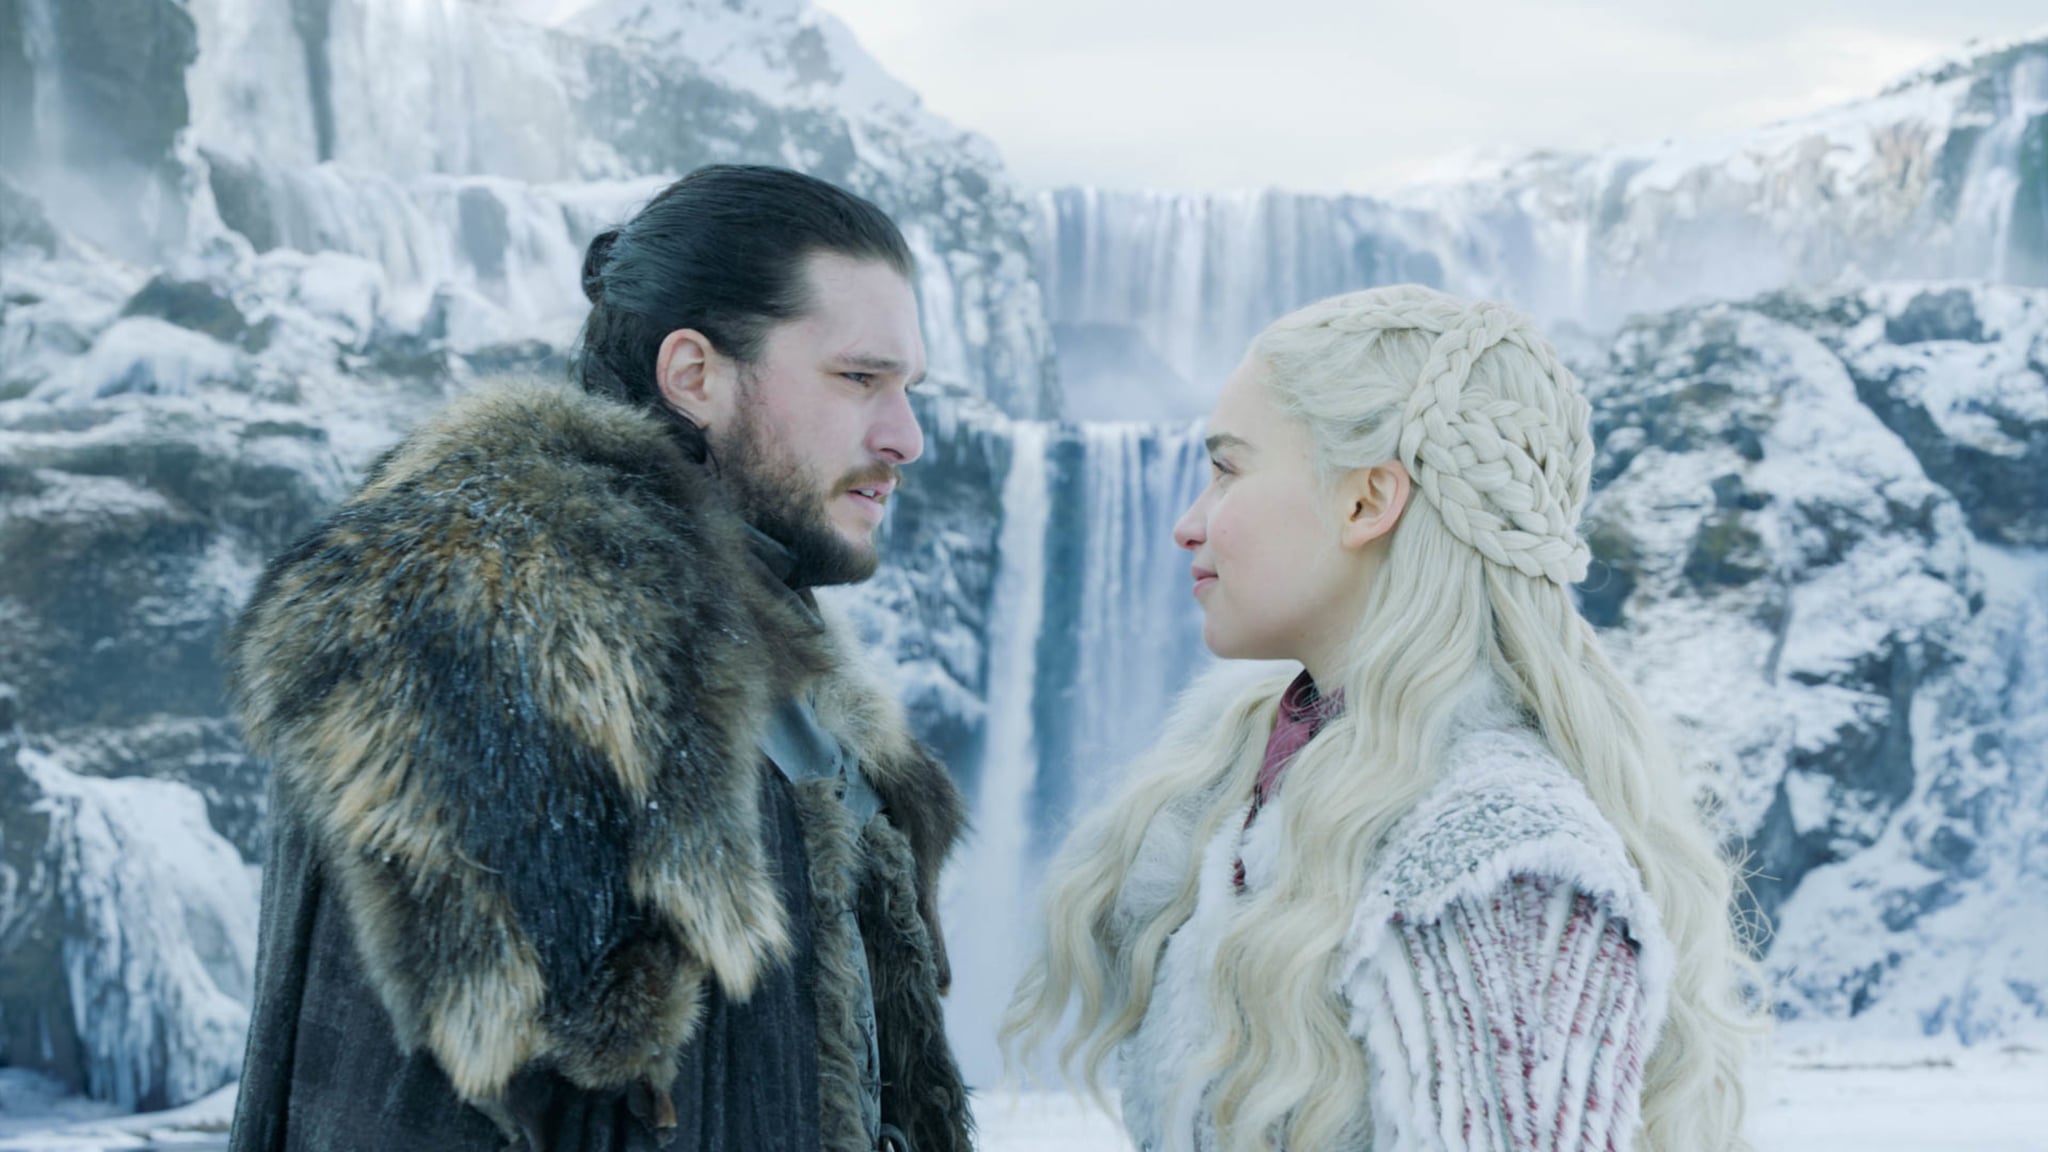 Will Jon Snow Kill Daenerys In The Game Of Thrones Finale